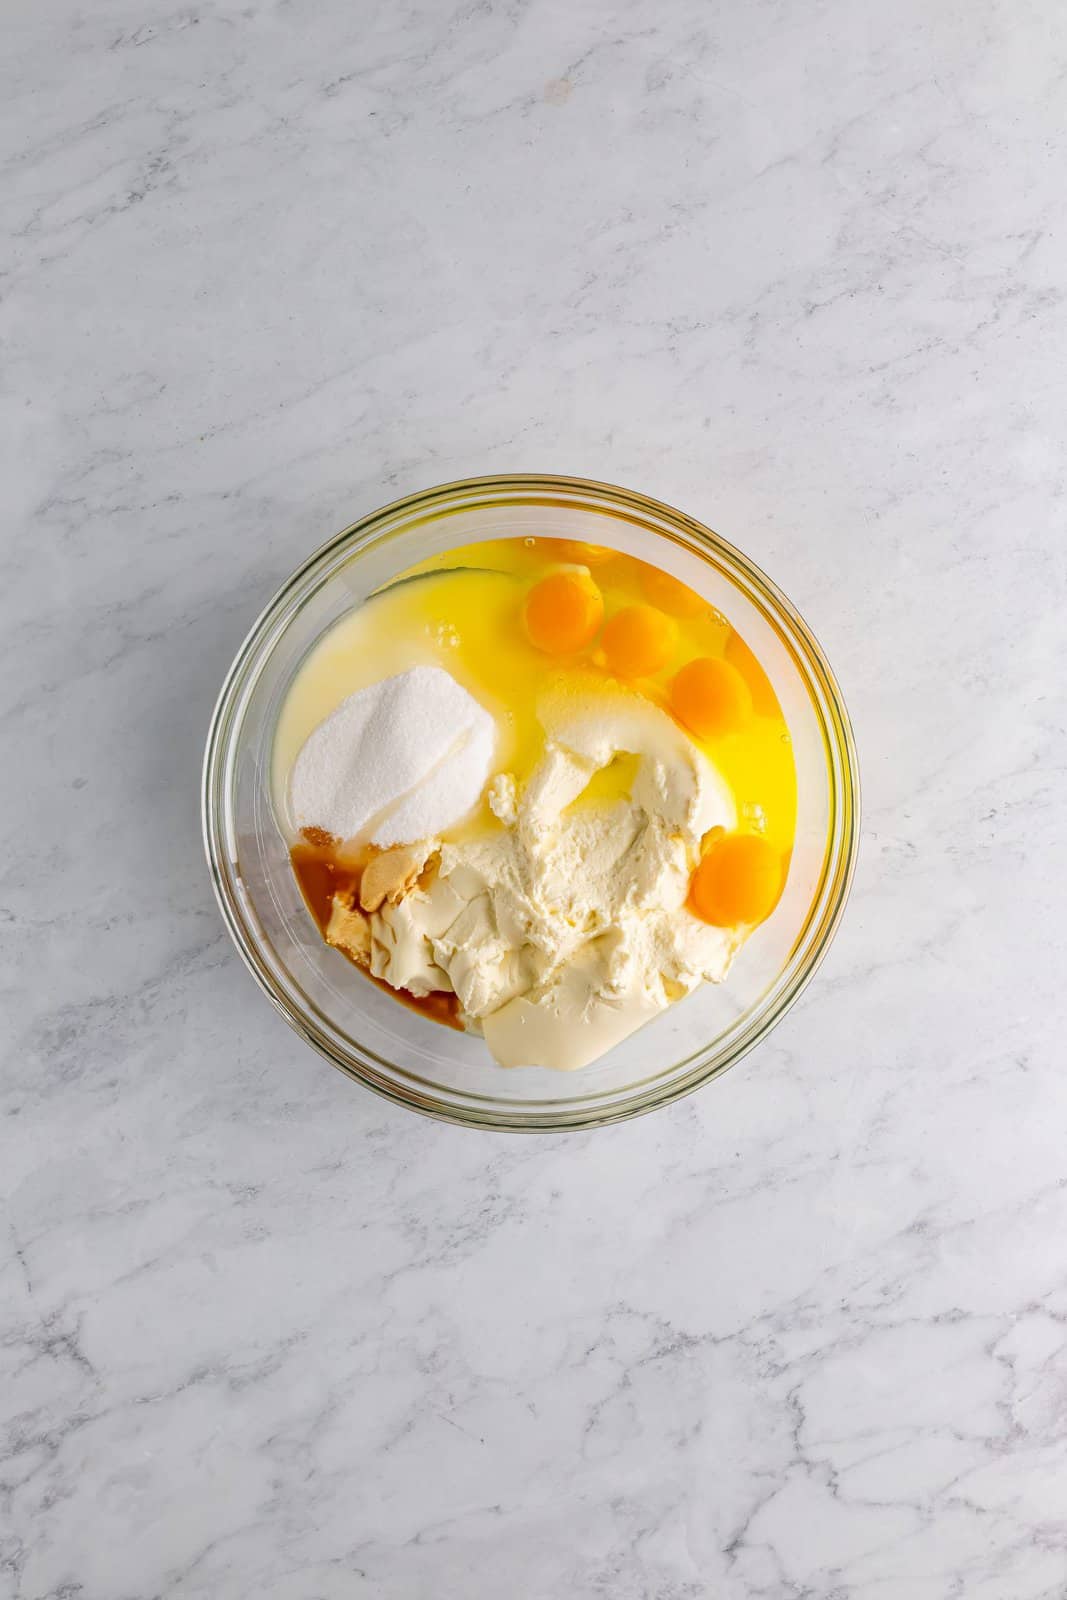 Ricotta, eggs, sugar, and vanilla in a large bowl.